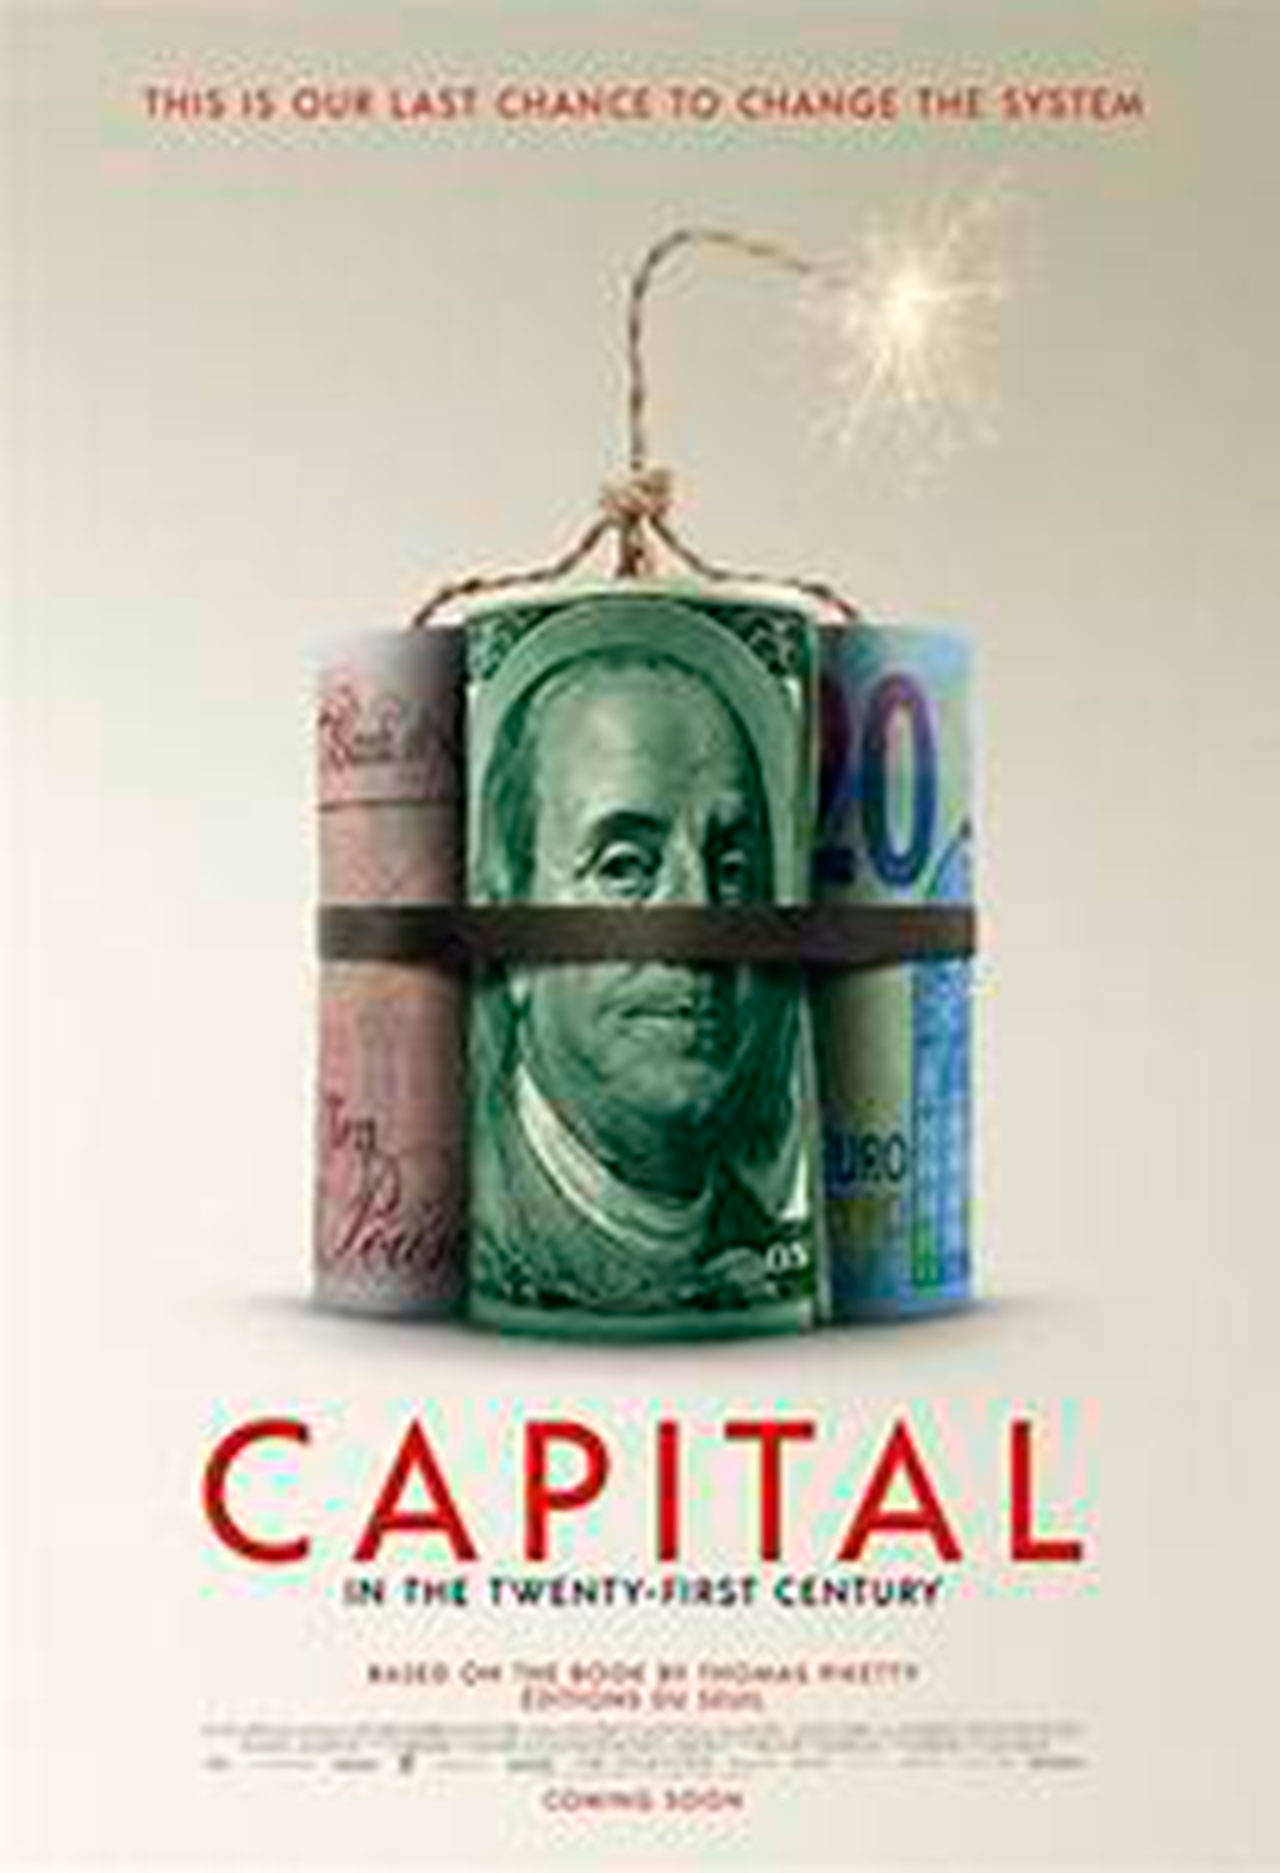 Image courtesy of Far Away Entertainment | “Capital in the Twenty-First Century,” one of the current offerings of Far Away Entertainment’s at-home rental Virtual Cinema streaming program.